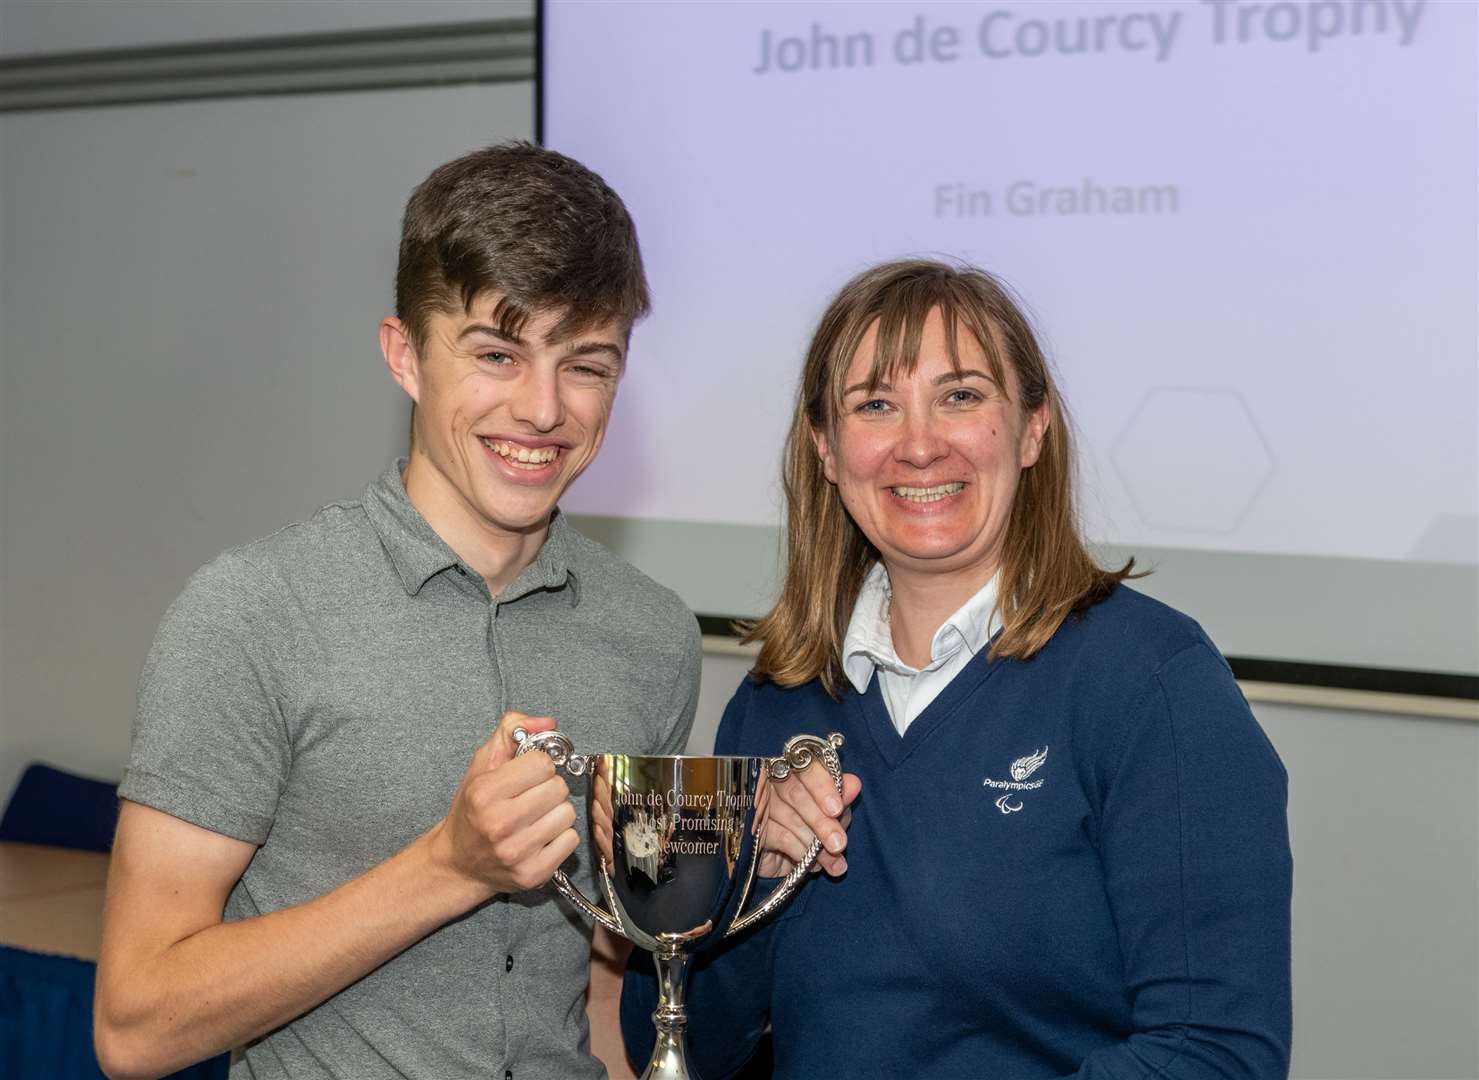 Fin Graham received the John de Courcy Trophy from Sheila Swan, head coach of the Scottish and Great Britain Wheelchair Curling Team.